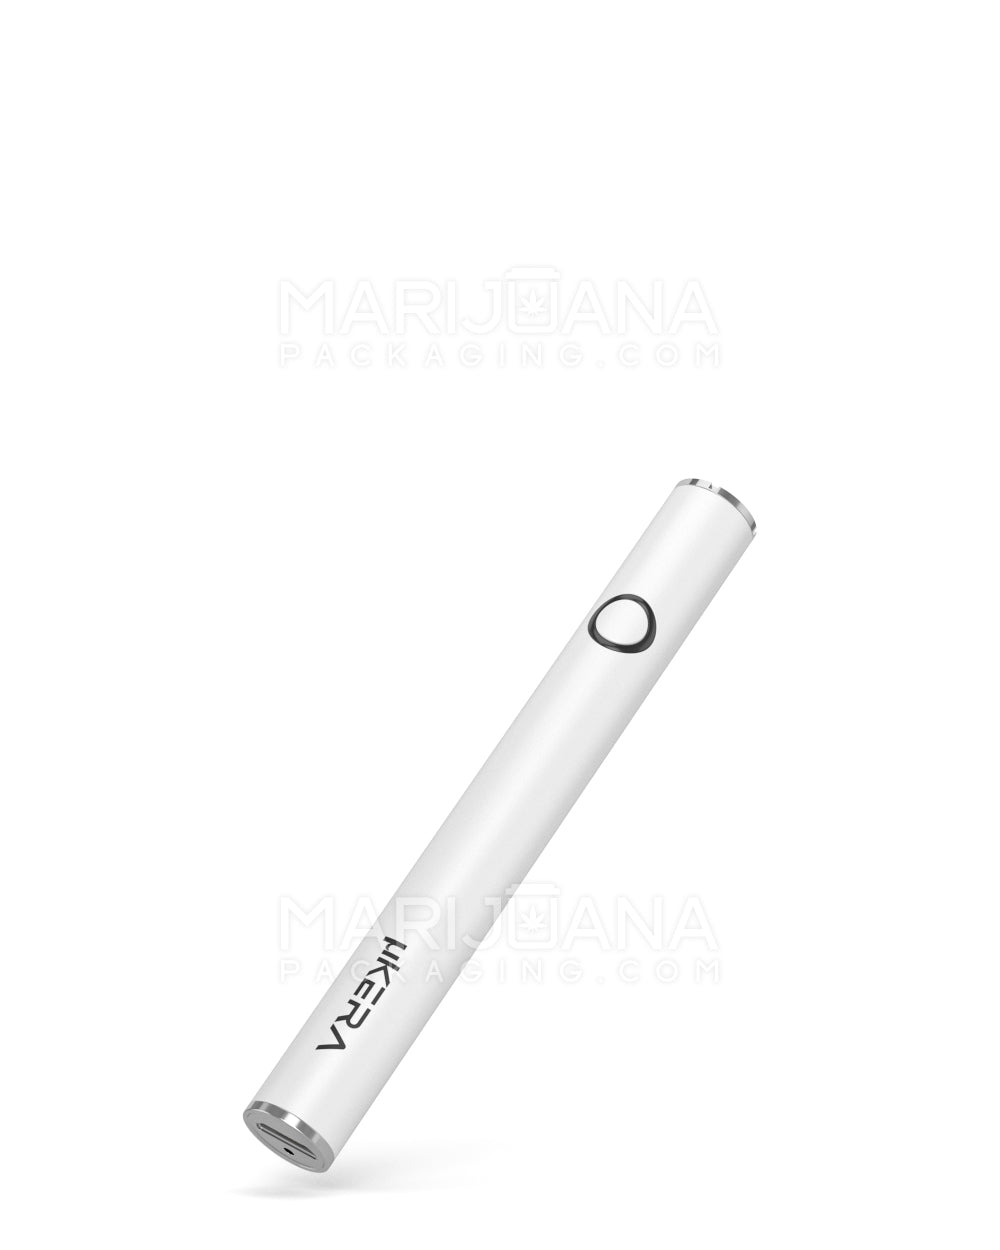 RAE | Variable Voltage Soft Touch Vape Battery | 320mAh - White - 640 Count - 4